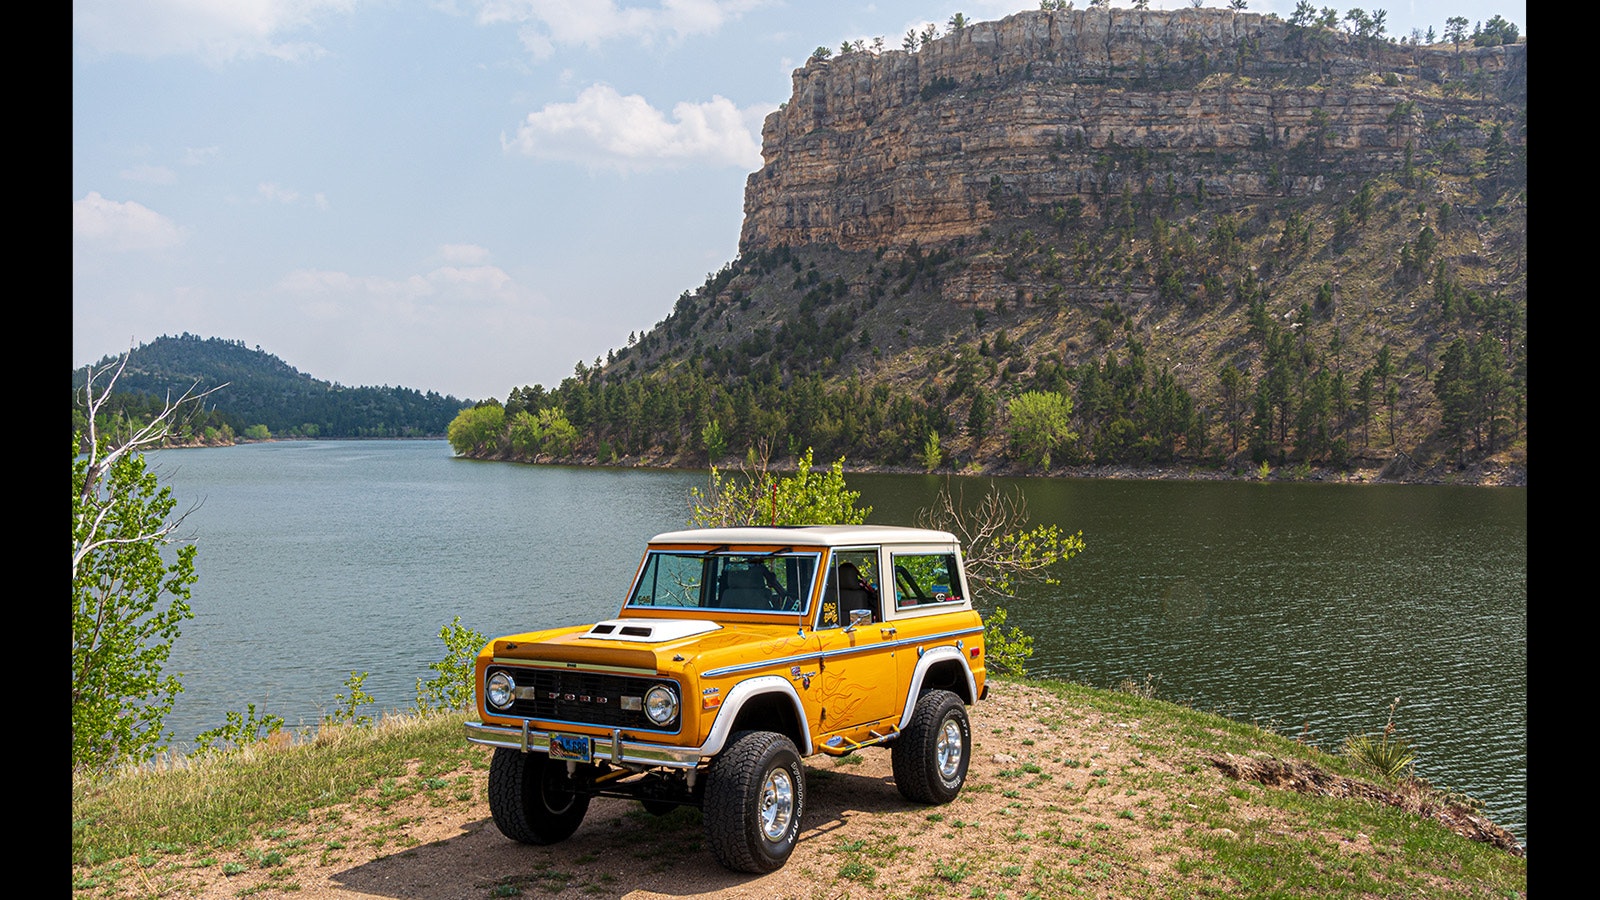 This classic 1973 Ford Bronco, called “Stella Louise,” belongs to Ed Schreiner of Torrington, who drives up to 50,000 miles a year exploring the beauty of Wyoming and the West and capturing glorious photos of his rig.